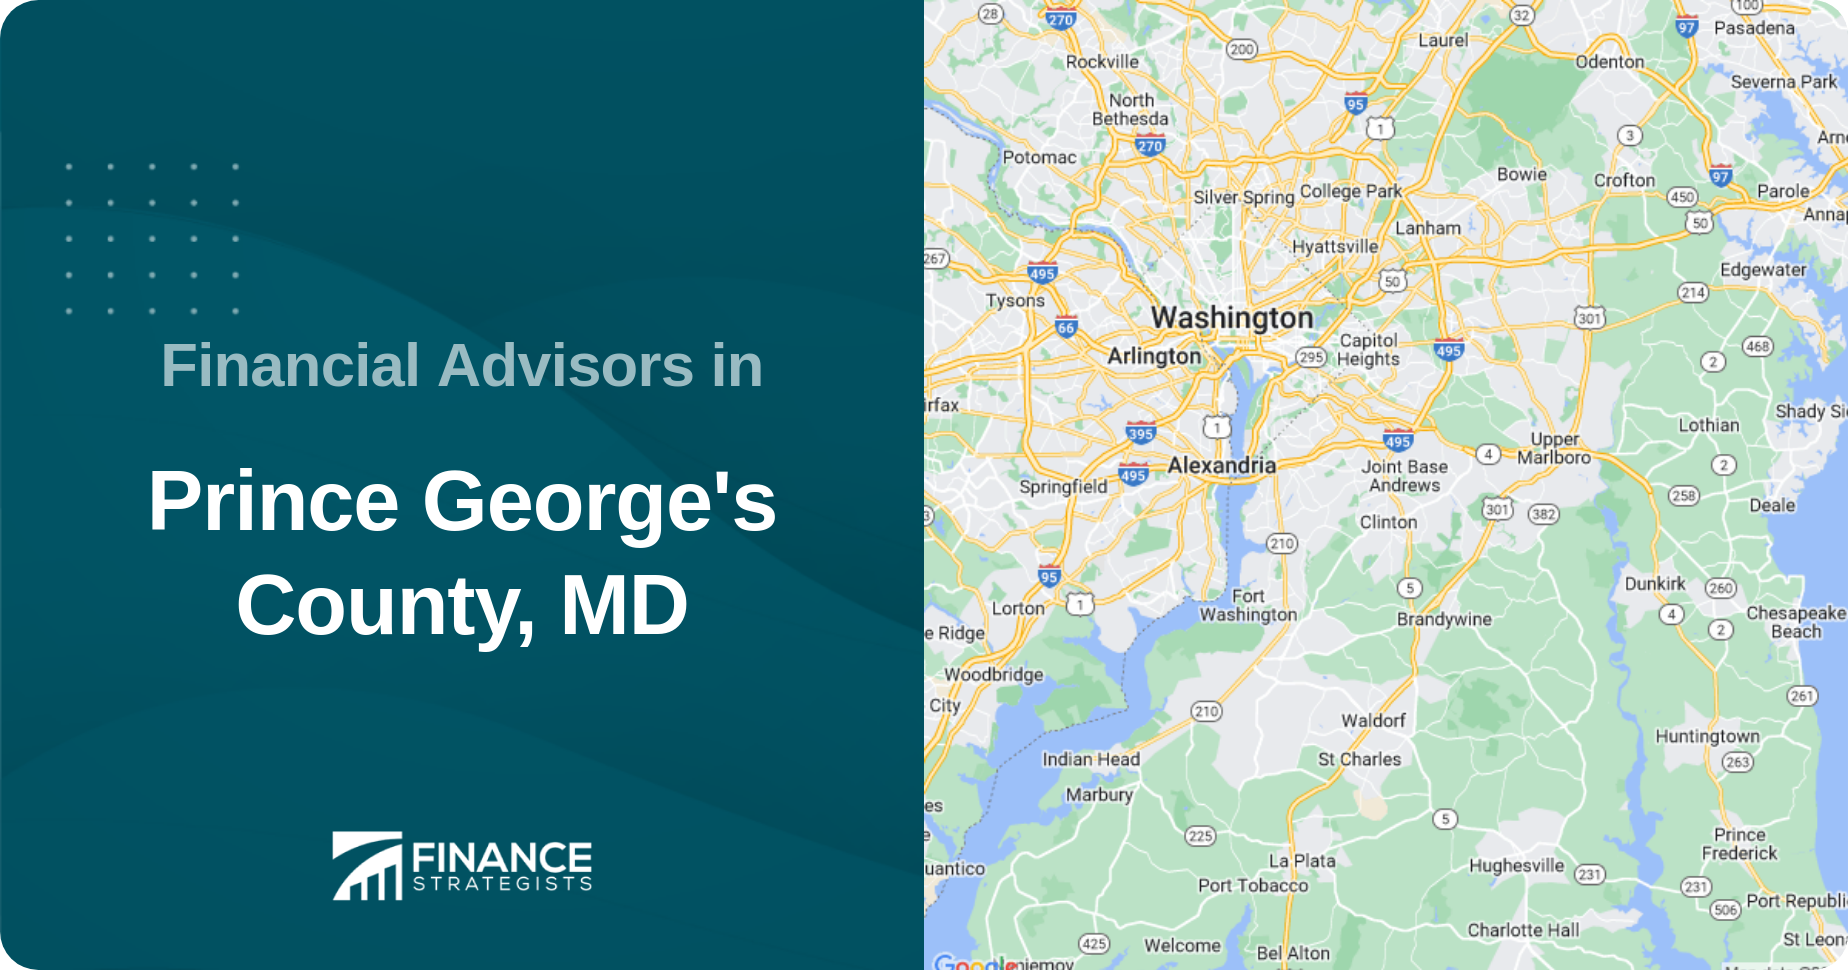 Financial Advisors in Prince George's County, MD